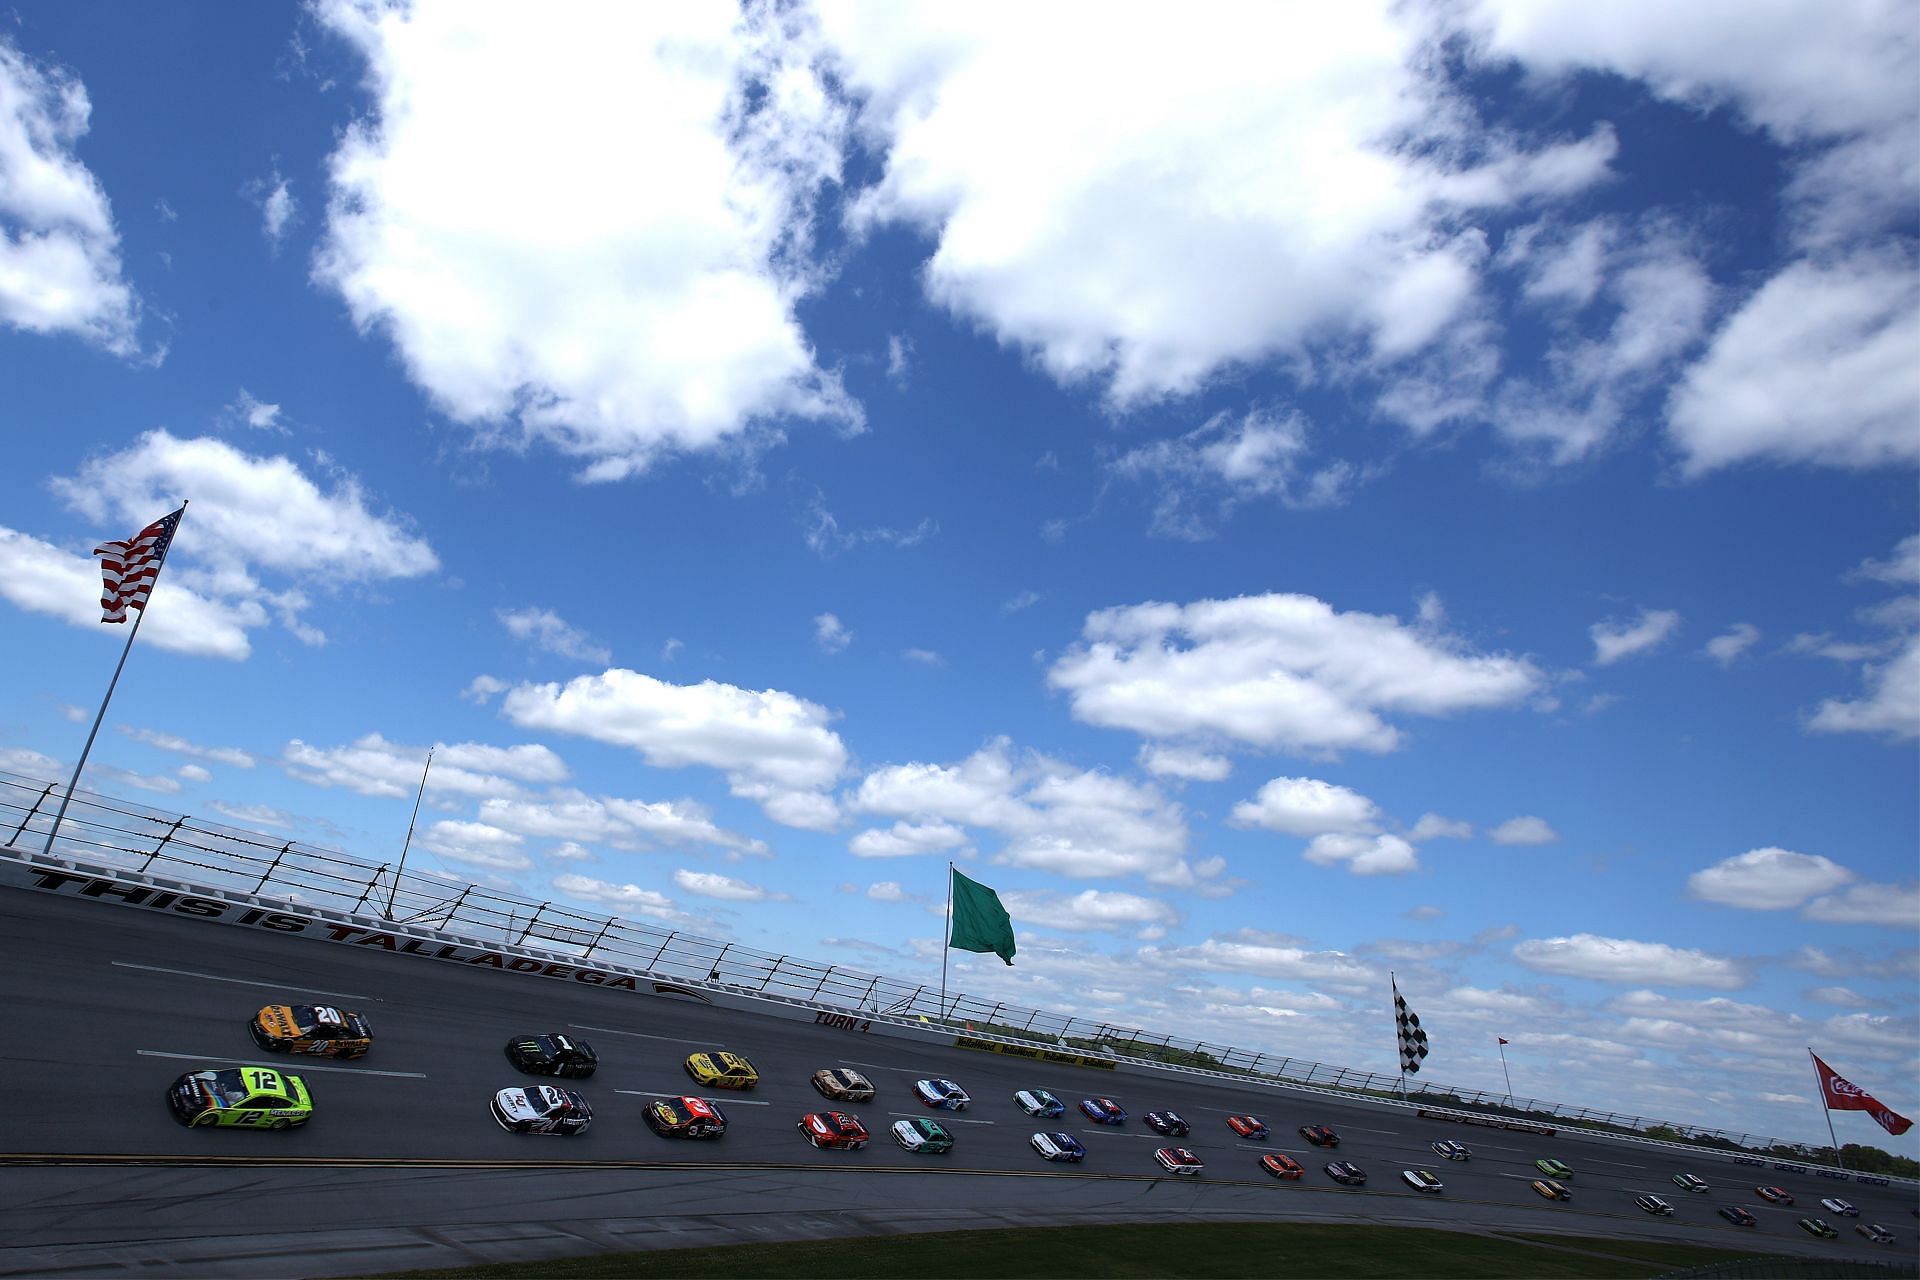 NASCAR 2022 at Talladega Race schedule and timings for GEICO 500 at